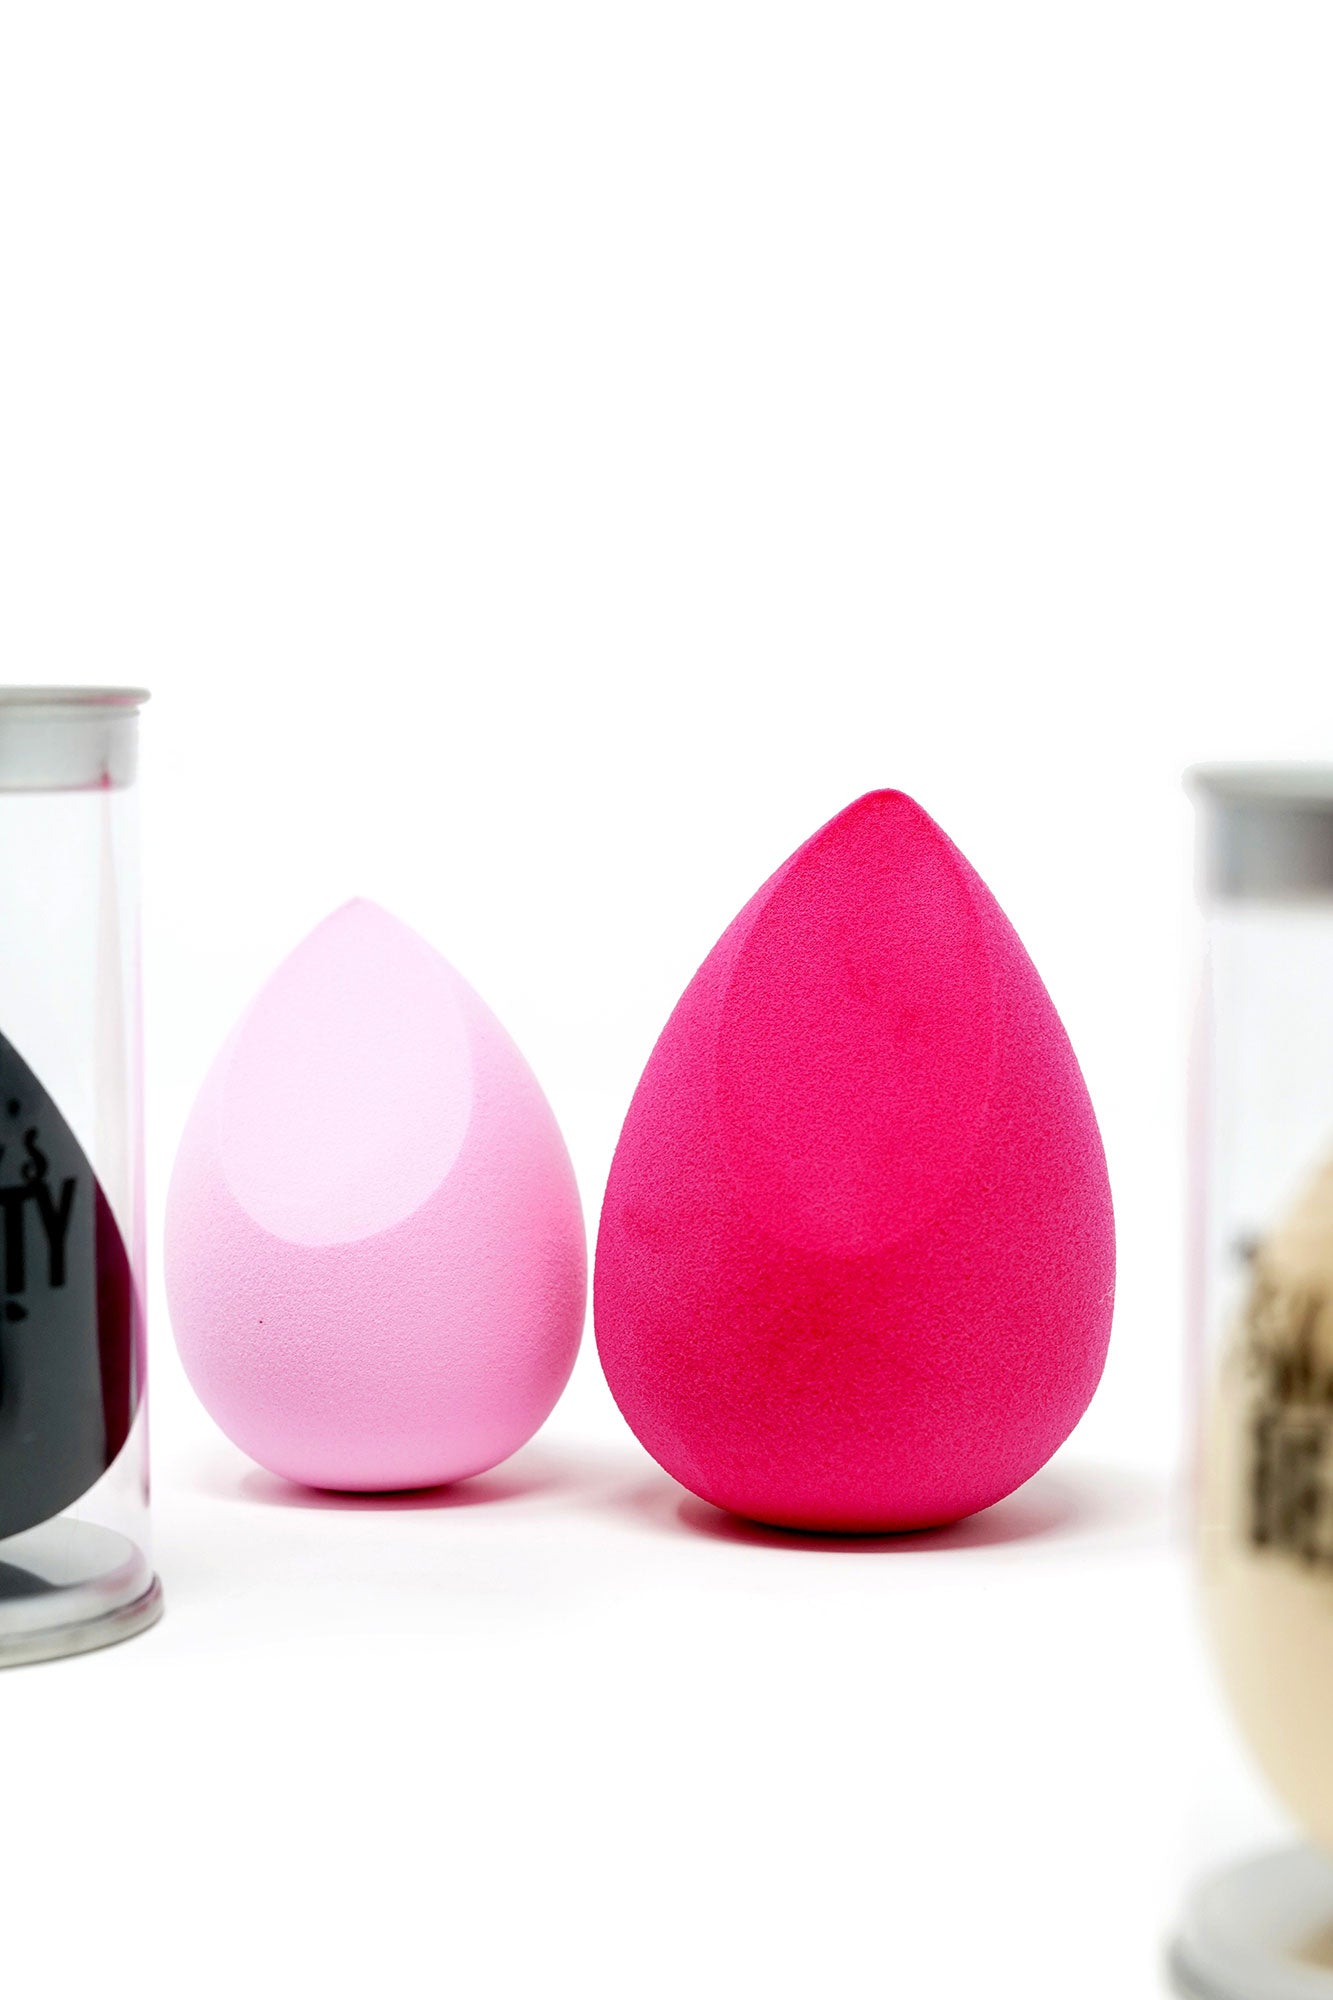 Beauty Blender "Panther"